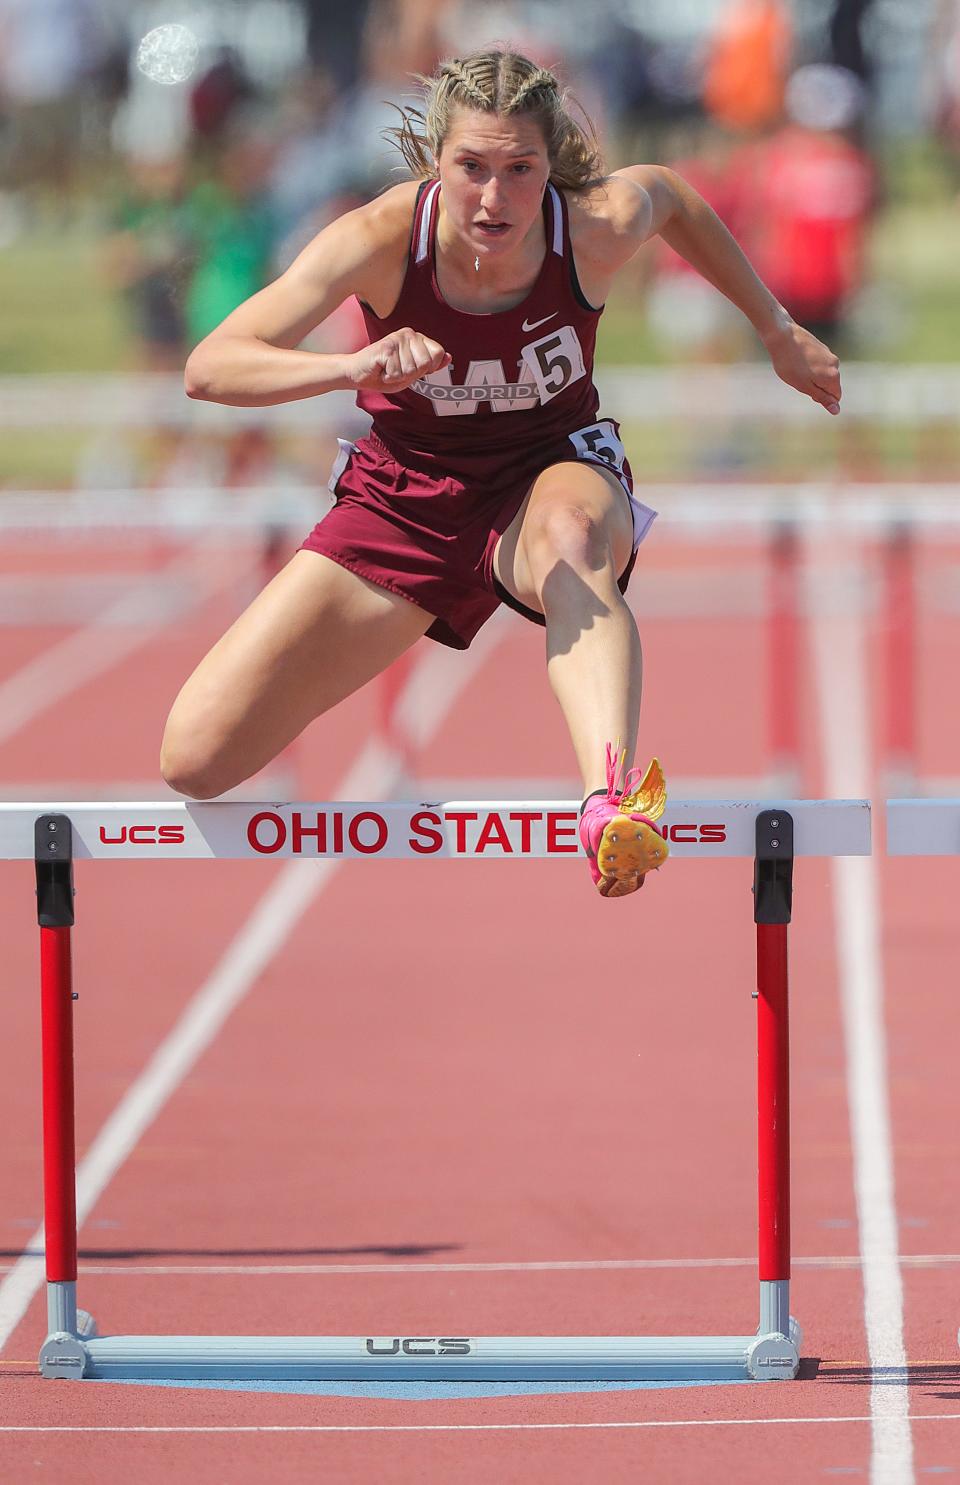 Woodridge's Anna Rorrer takes the last hurdle in the 300 meter hurdle semi-final race during the OHSAA Division II state track & field championships on Friday, June 2, 2023 in Columbus, Ohio, at Jesse Owens Memorial Stadium.